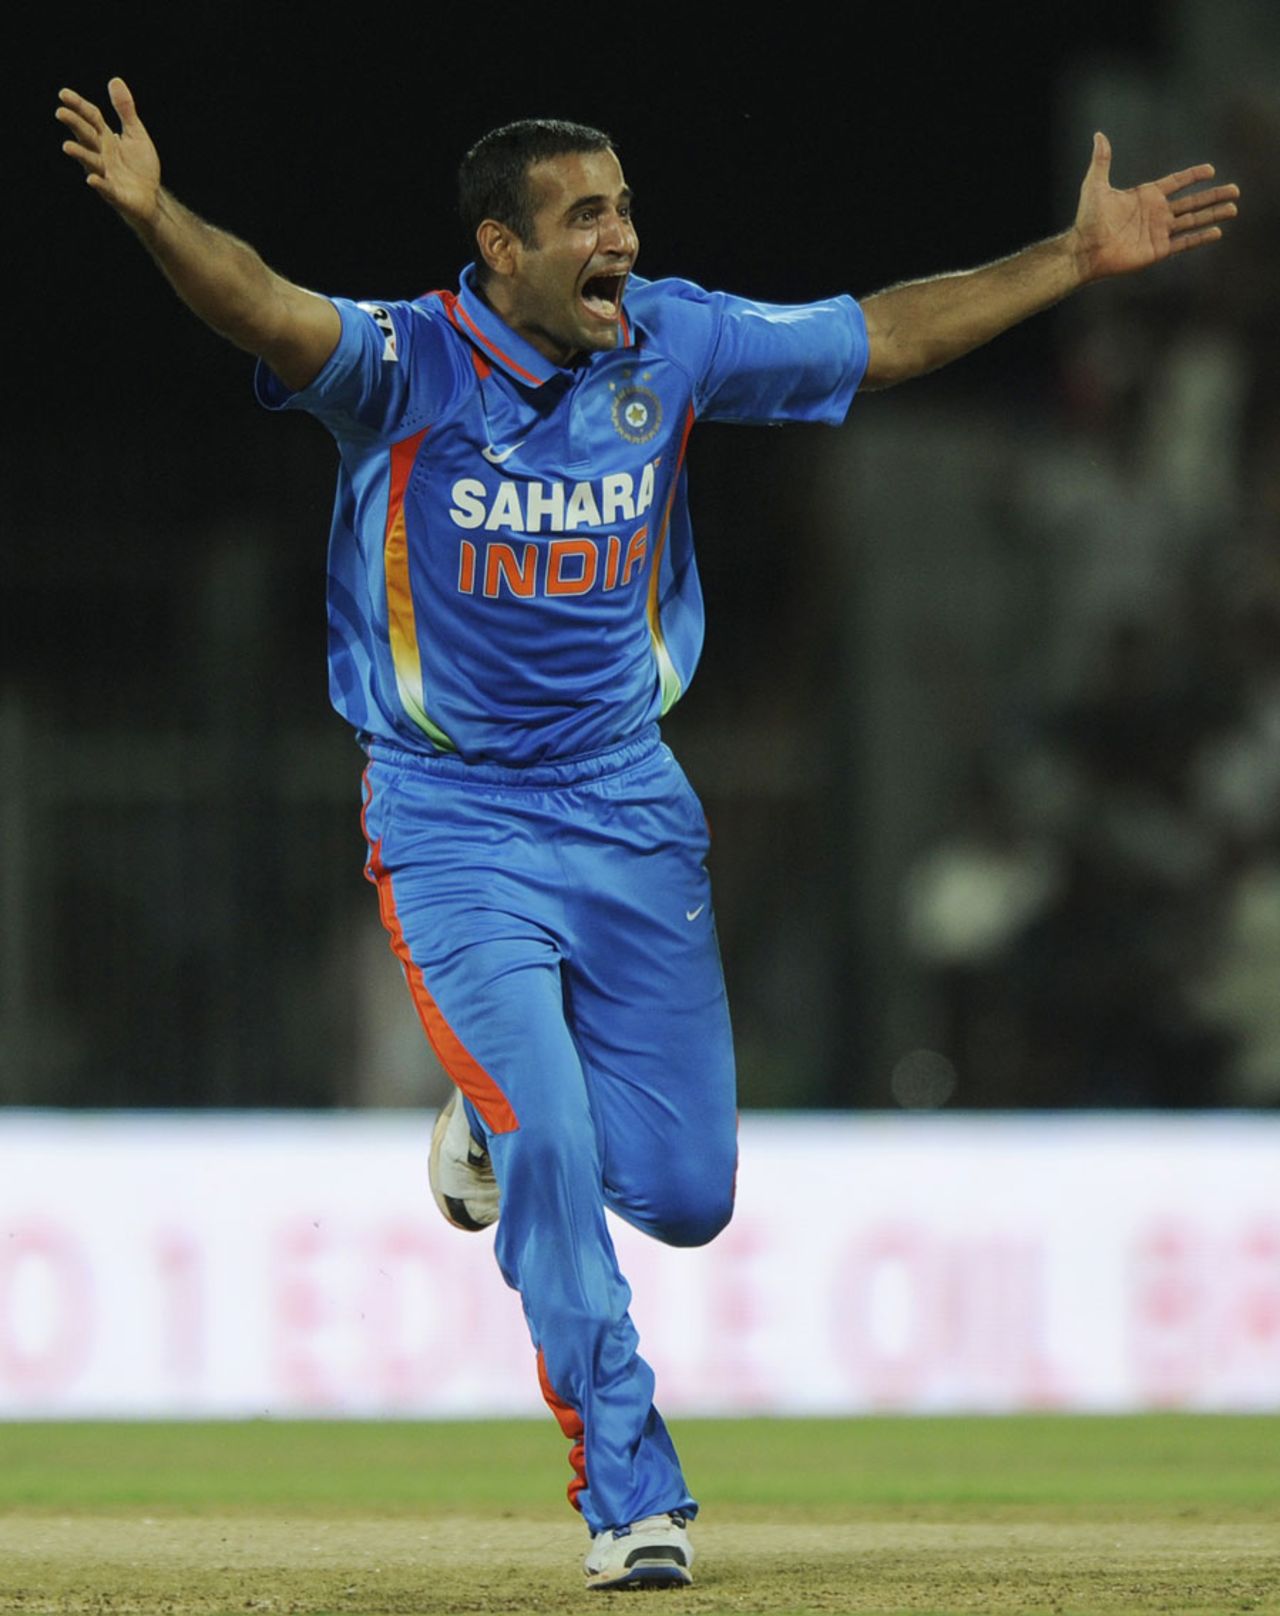 Irfan Pathan celebrates after taking a wicket with his first ball, India v West Indies, 5th ODI, Chennai, December 11, 2011